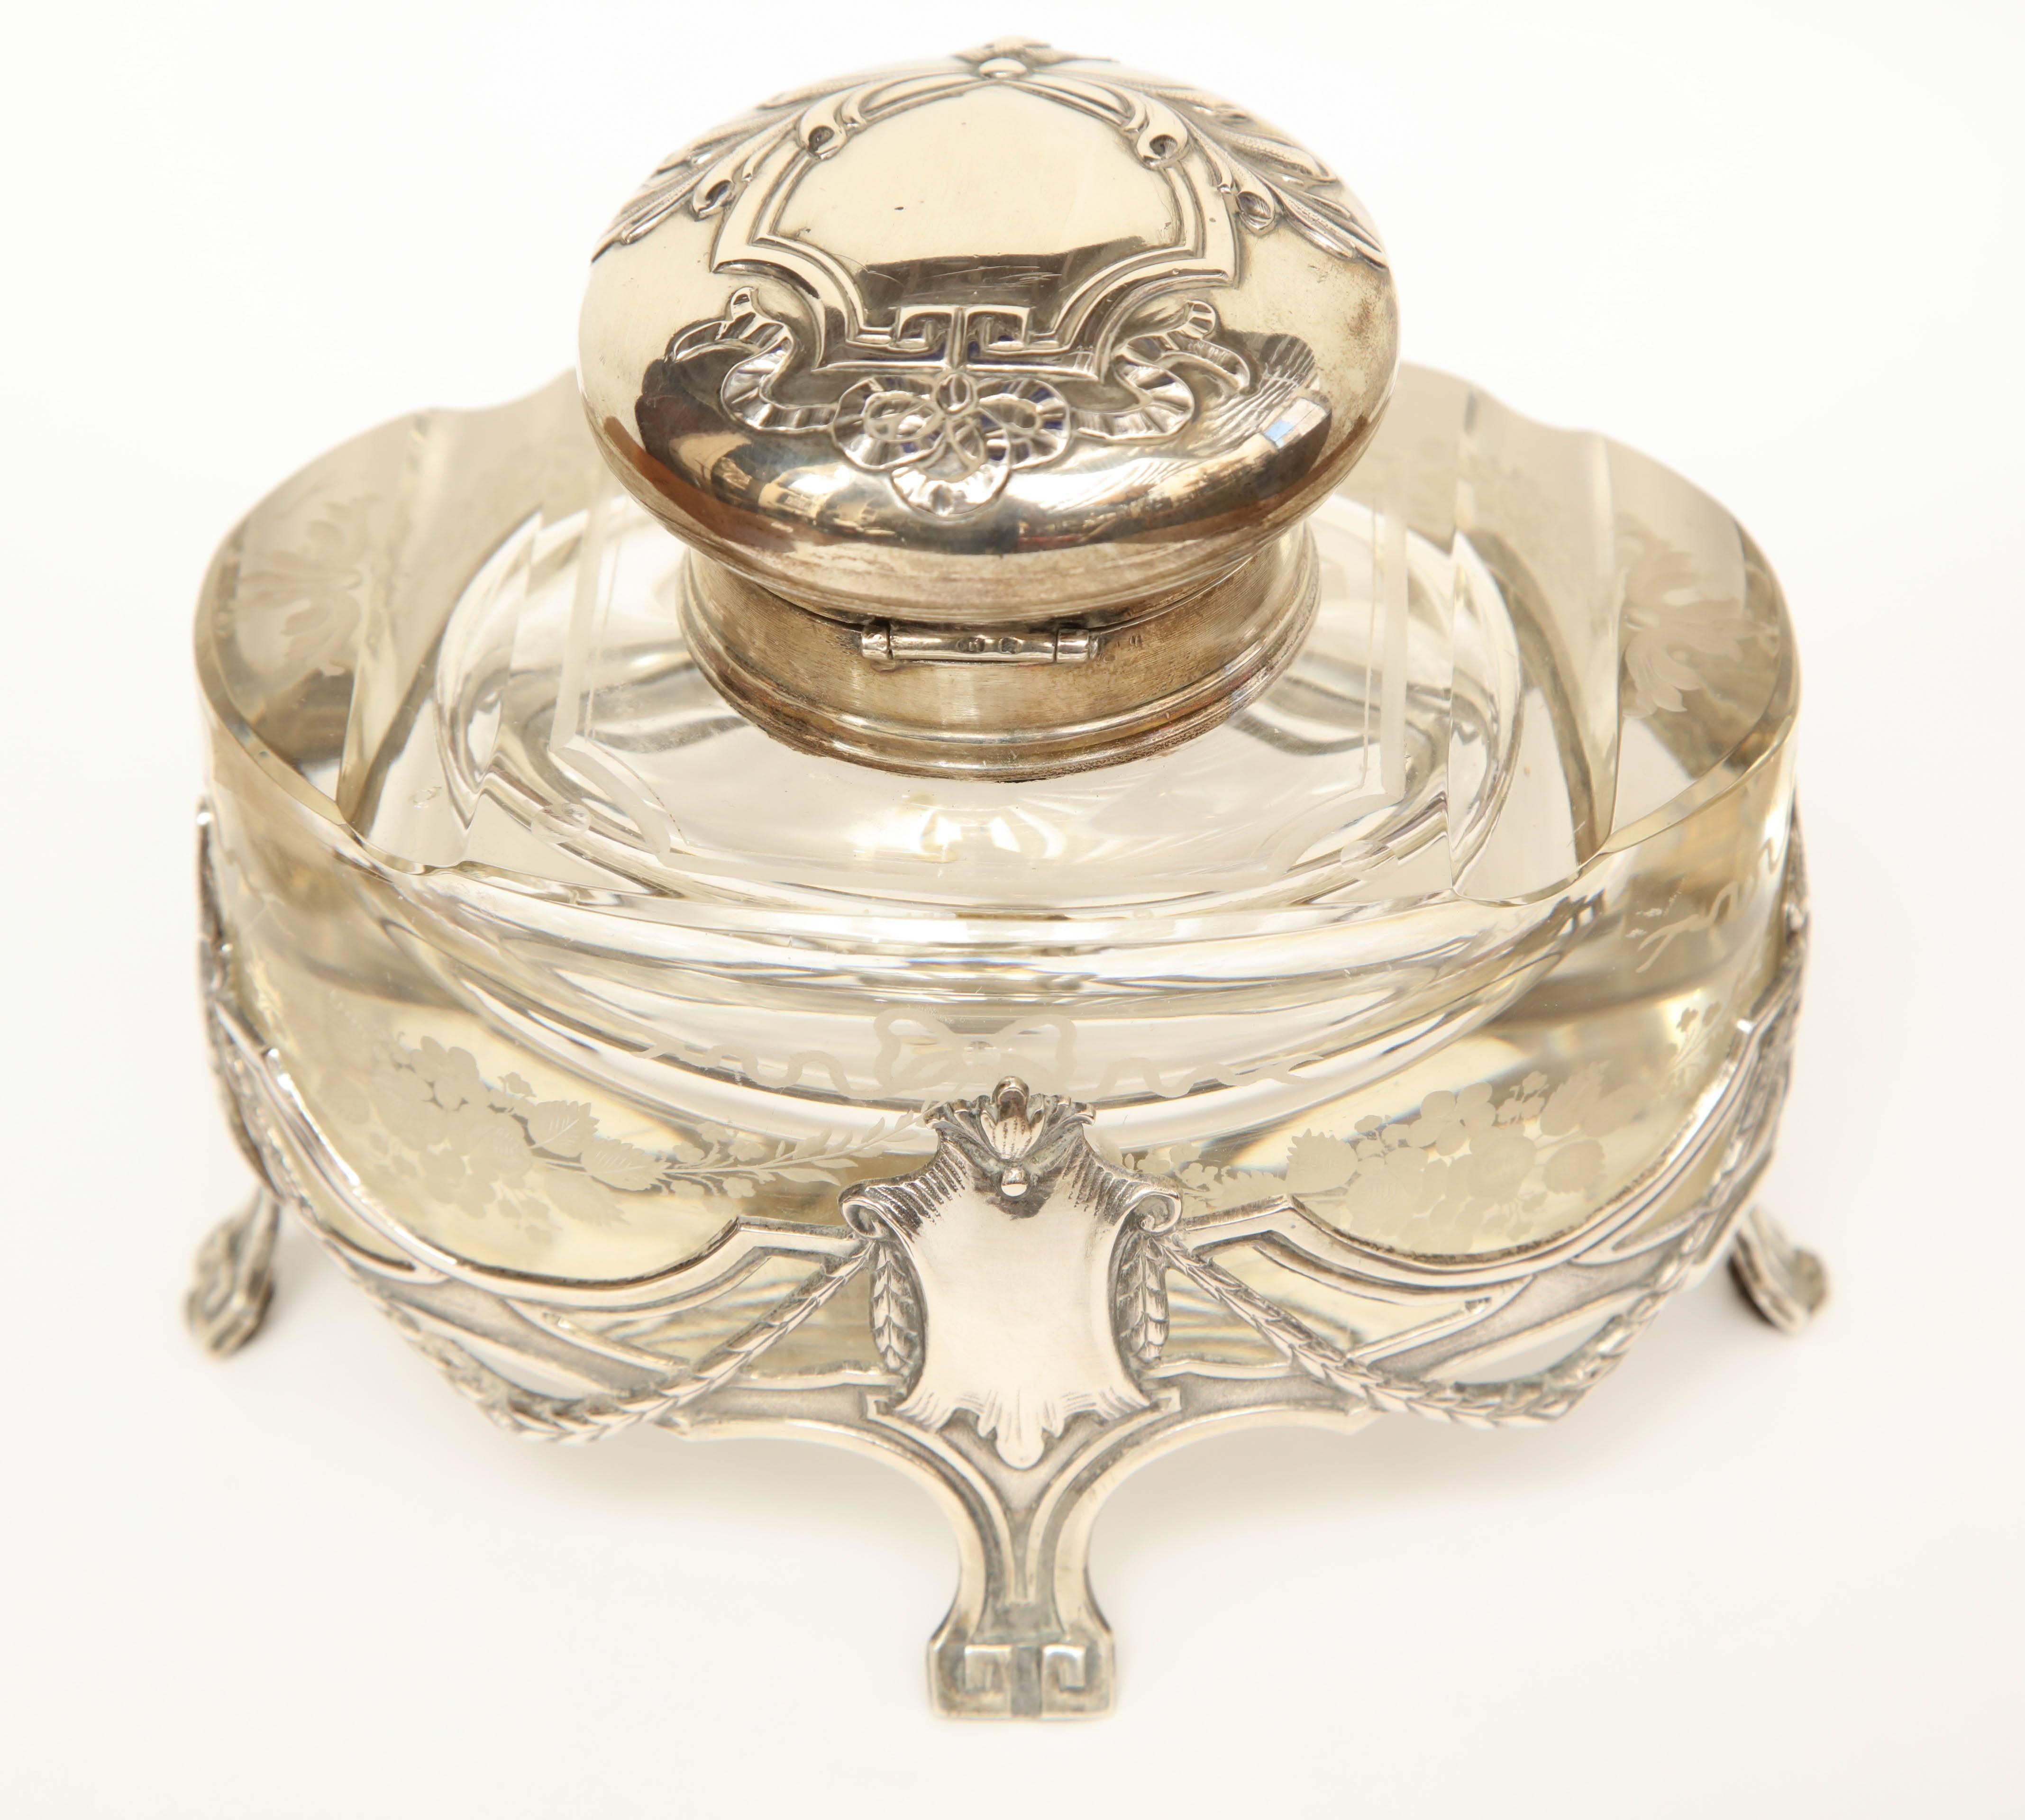 Early 20th Century Art Nouveau German Silver and Glass Inkwell For Sale 3